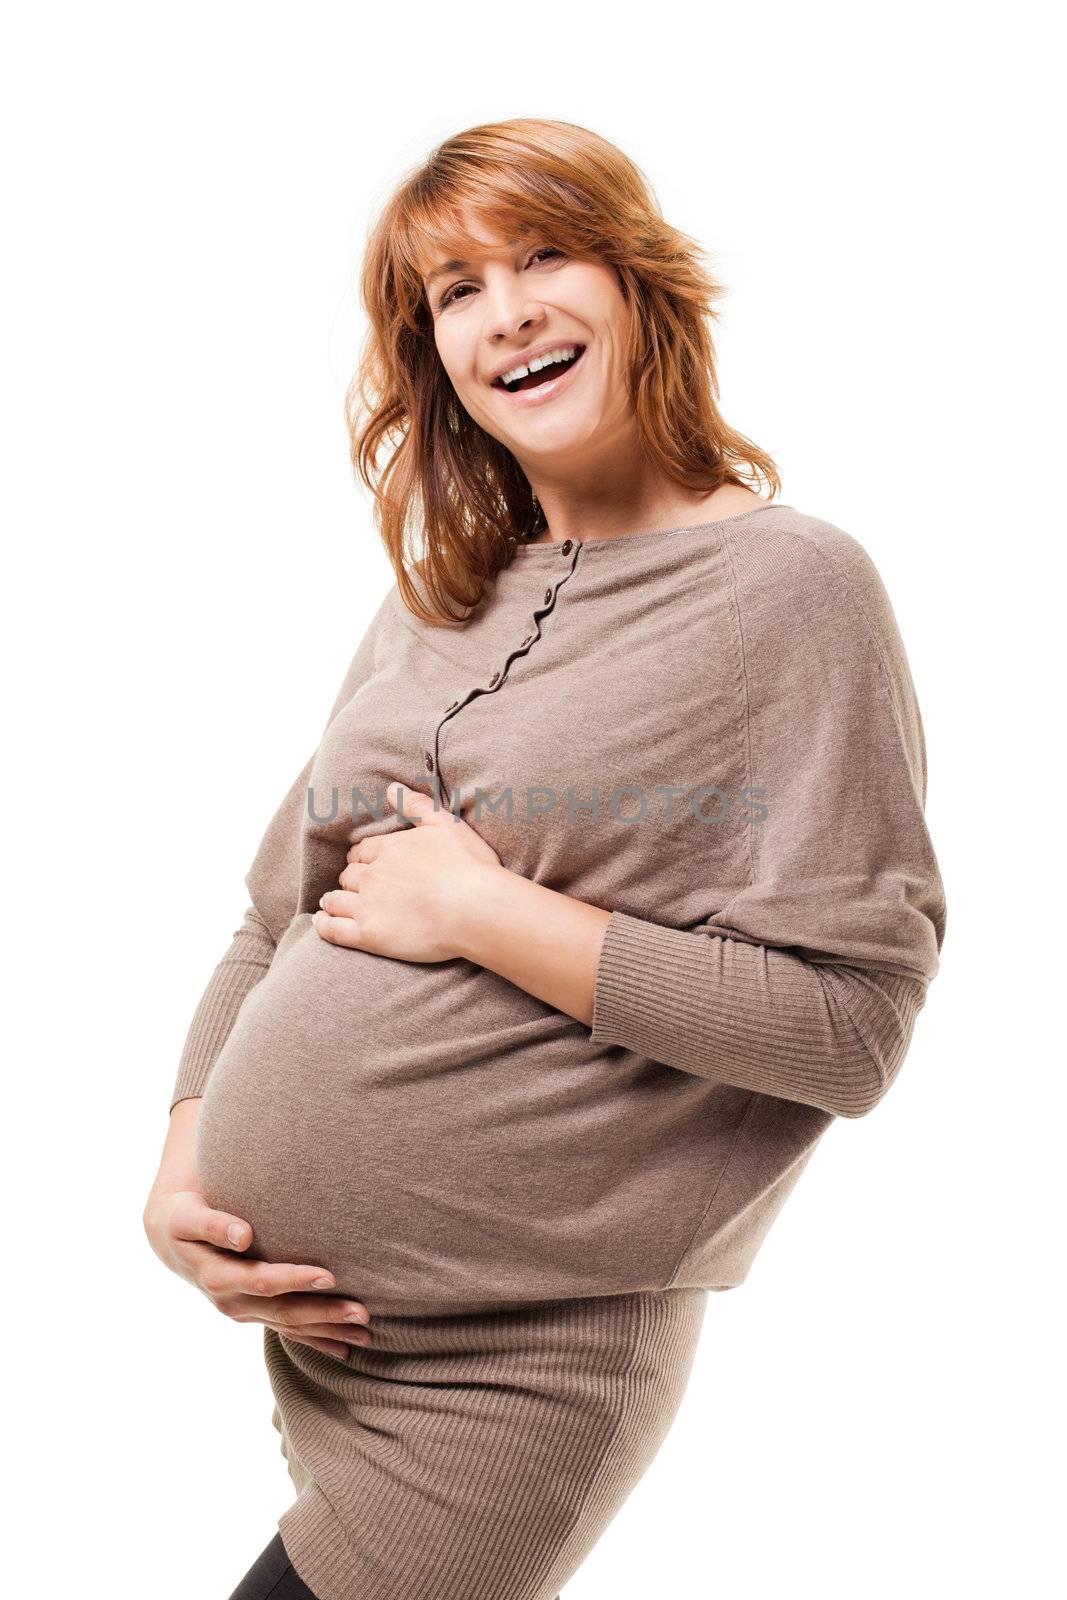 Image of charming pregnant female touching her tummy, laughing and looking positive at camera